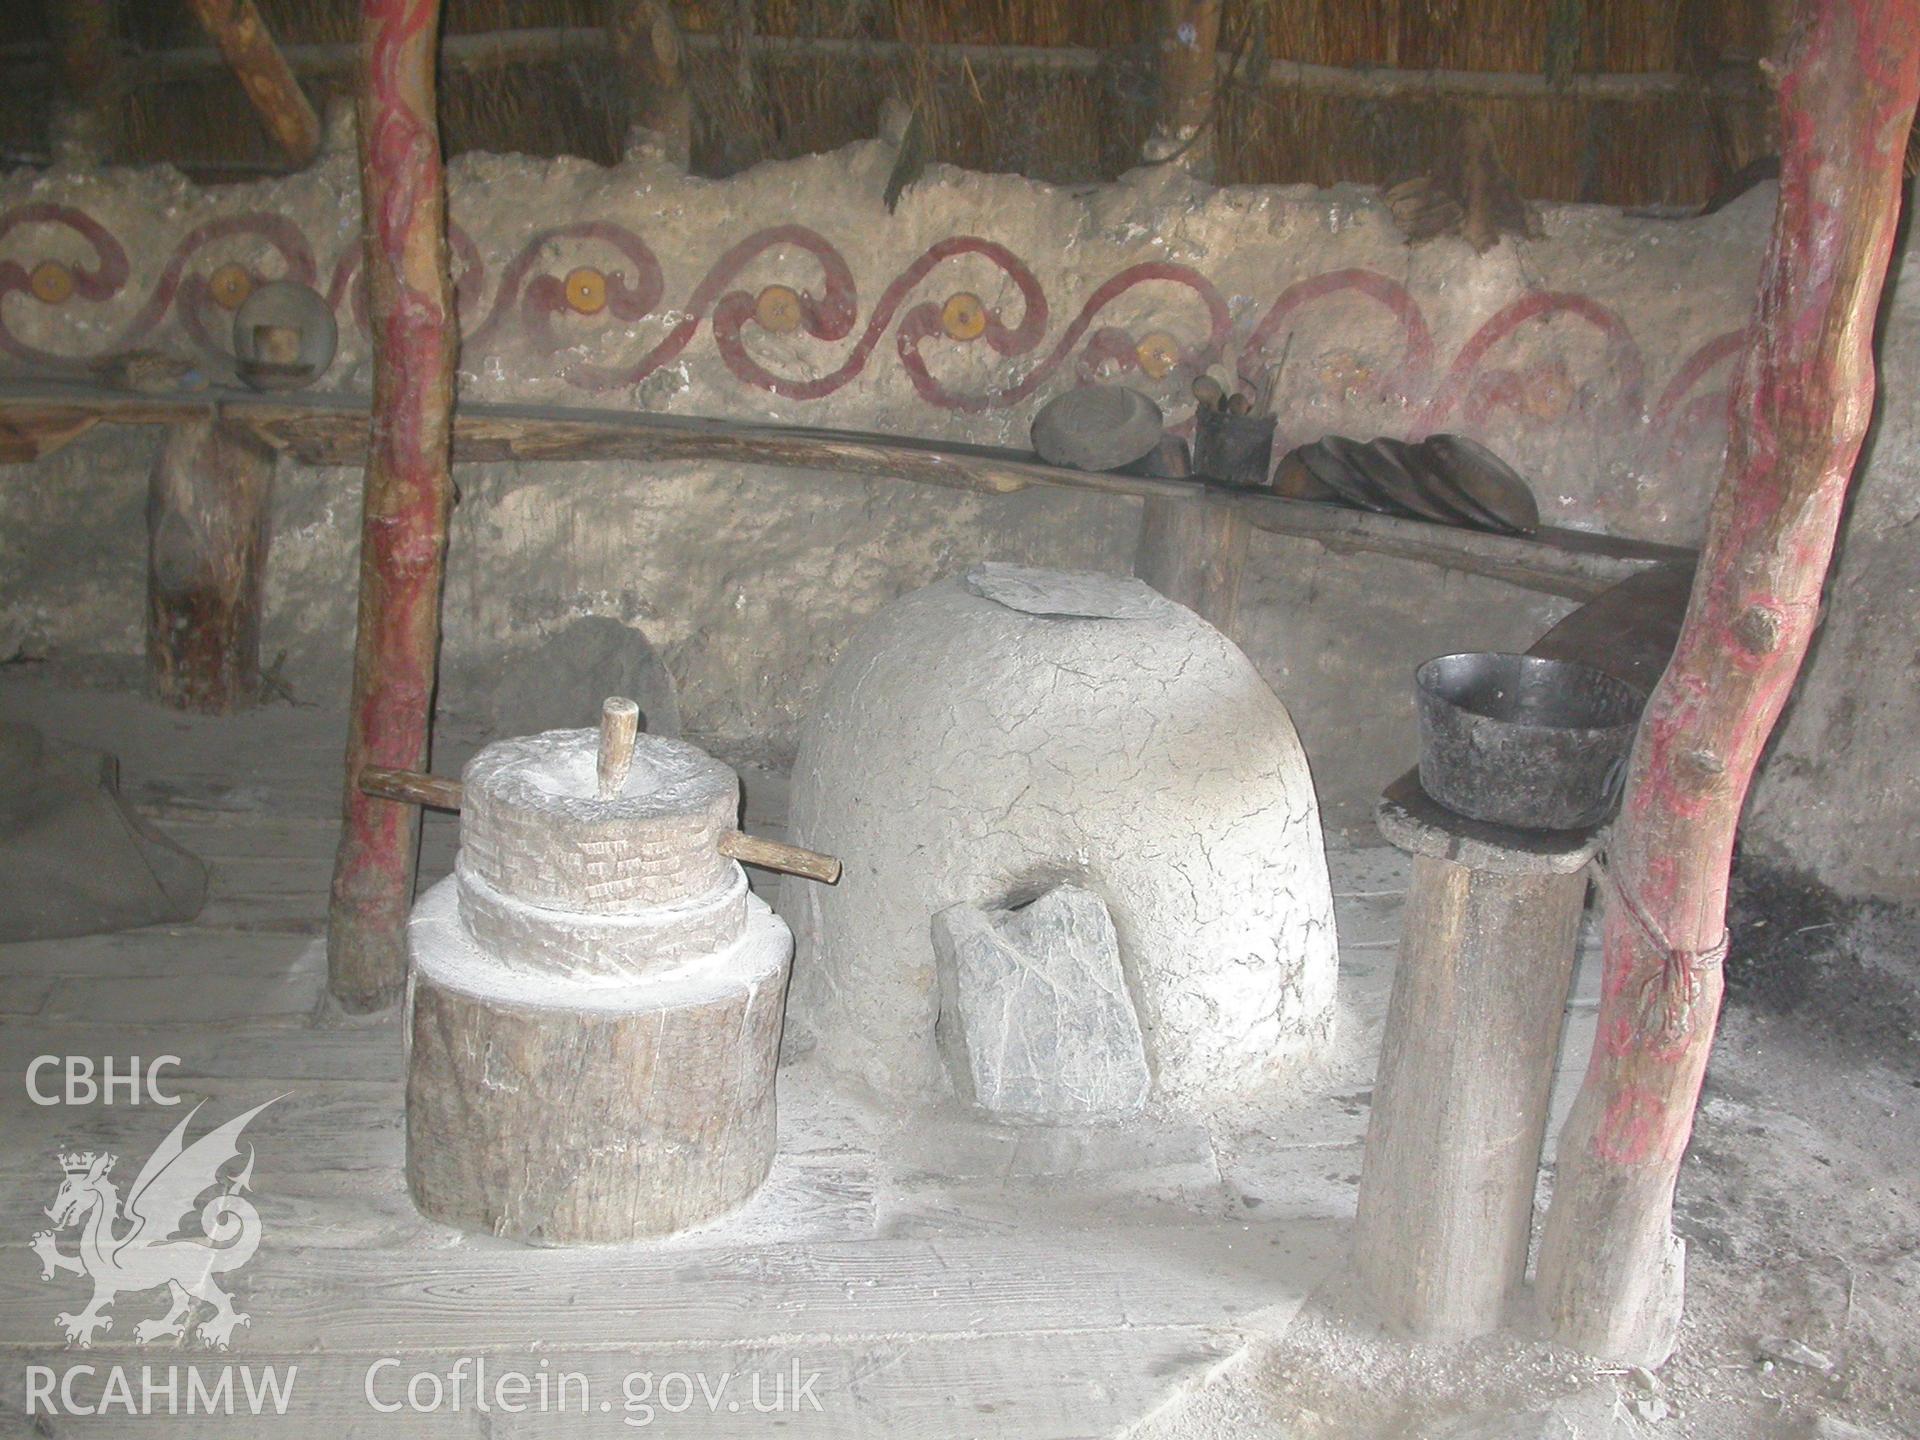 Corn-grinding quern and oven to the right of the entrance.